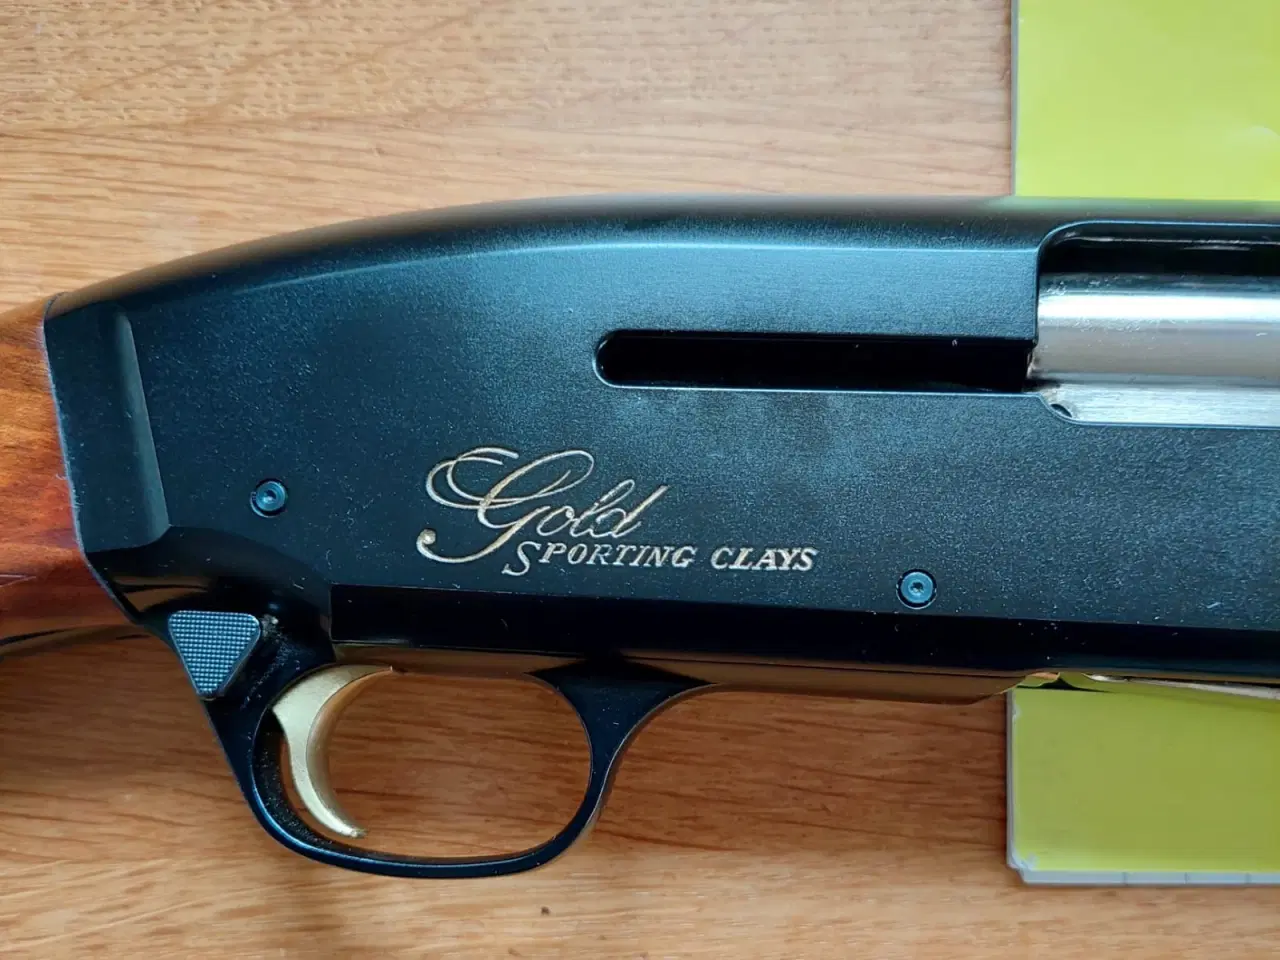 Billede 2 - Browning Gold Sporting Clays